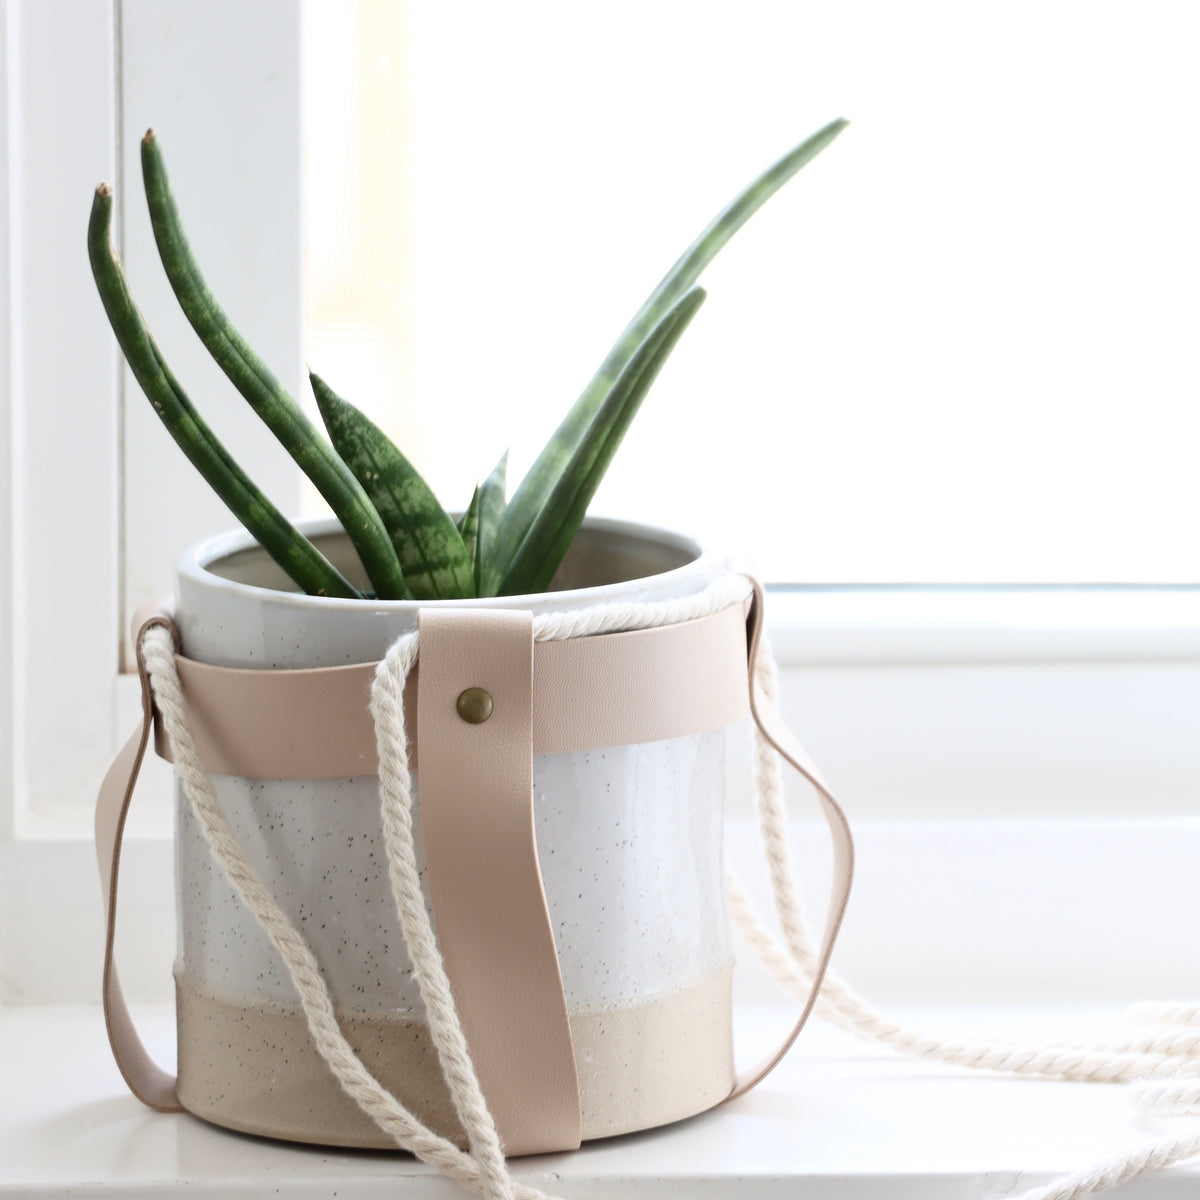 Hang in There Stoneware Hanging Planter With Faux Leather Straps - Holistic Habitat 